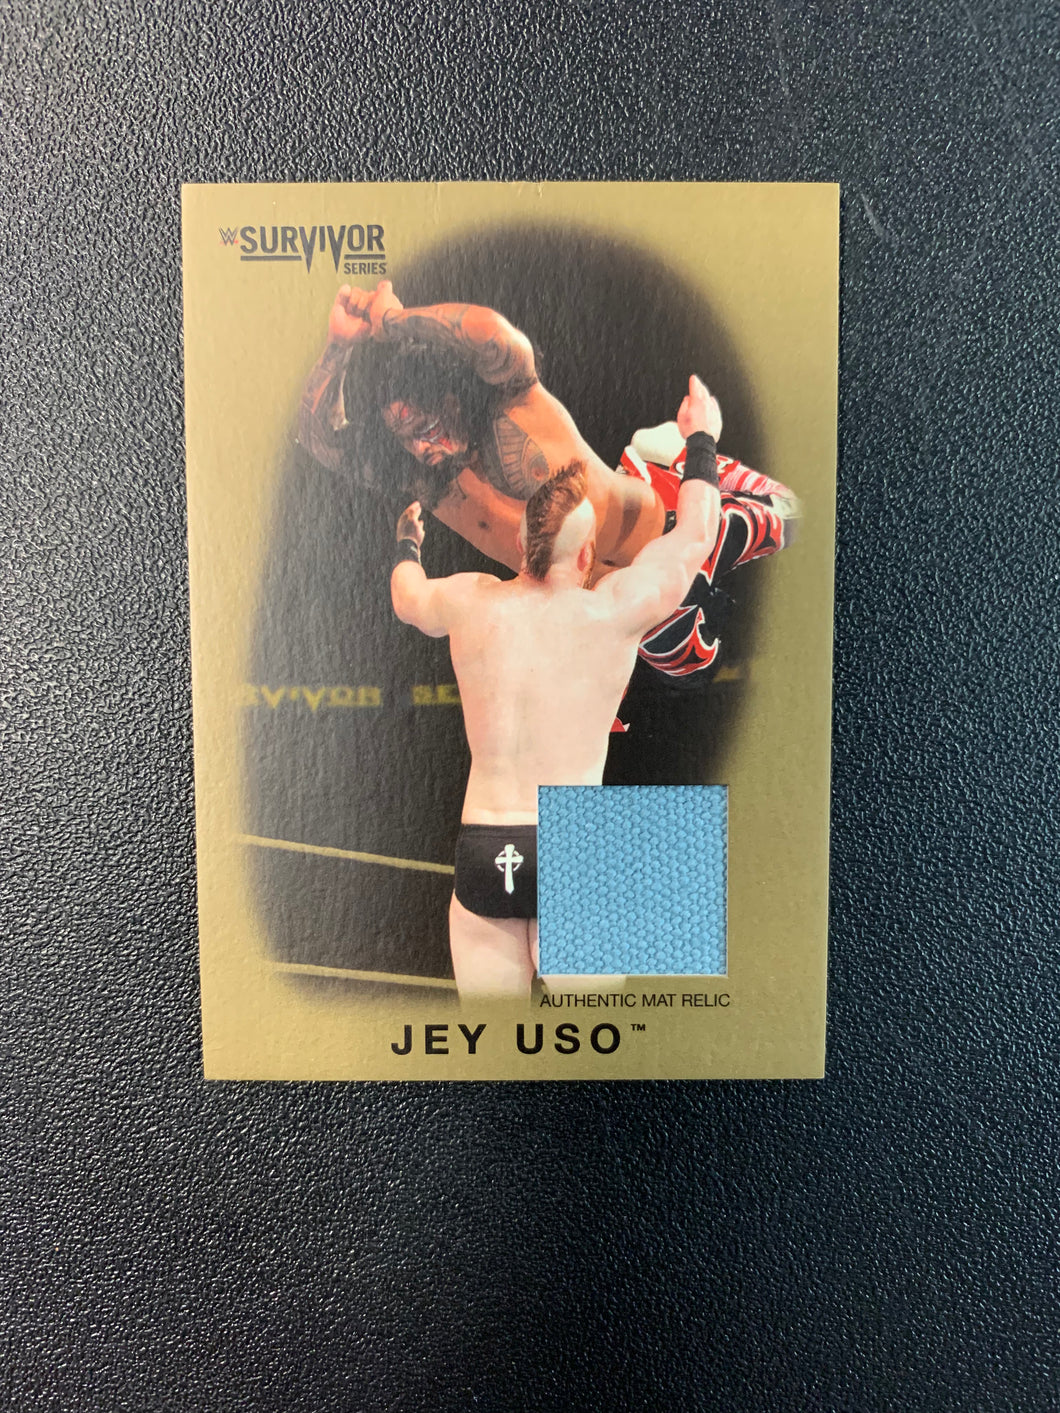 TOPPS WWE SURVIVOR SERIES RING MAT RELIC GOLD JEY USO 02/10